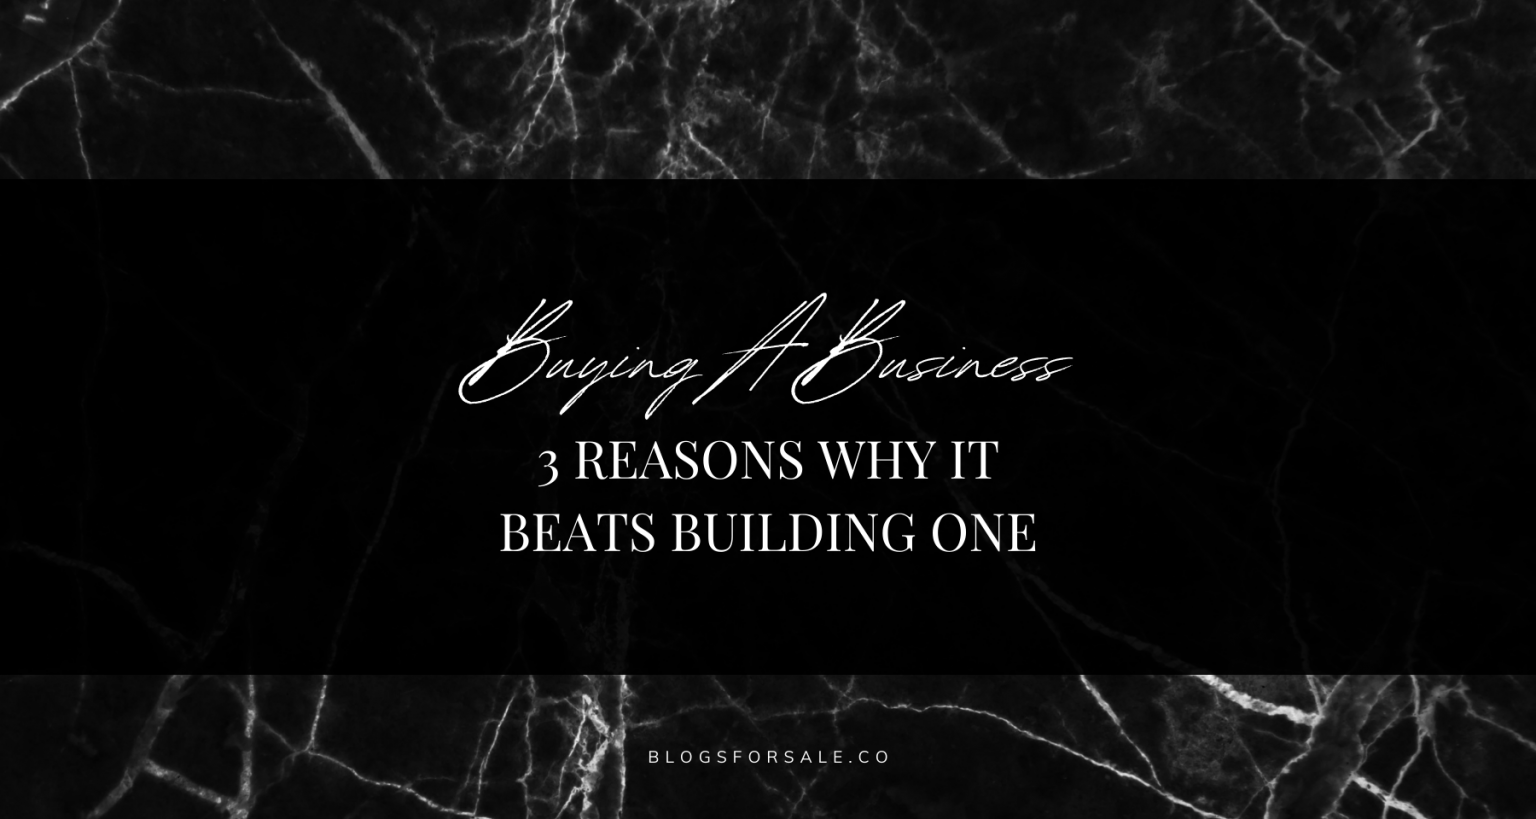 8-reasons-why-buying-your-next-business-beats-building-one-1536x819